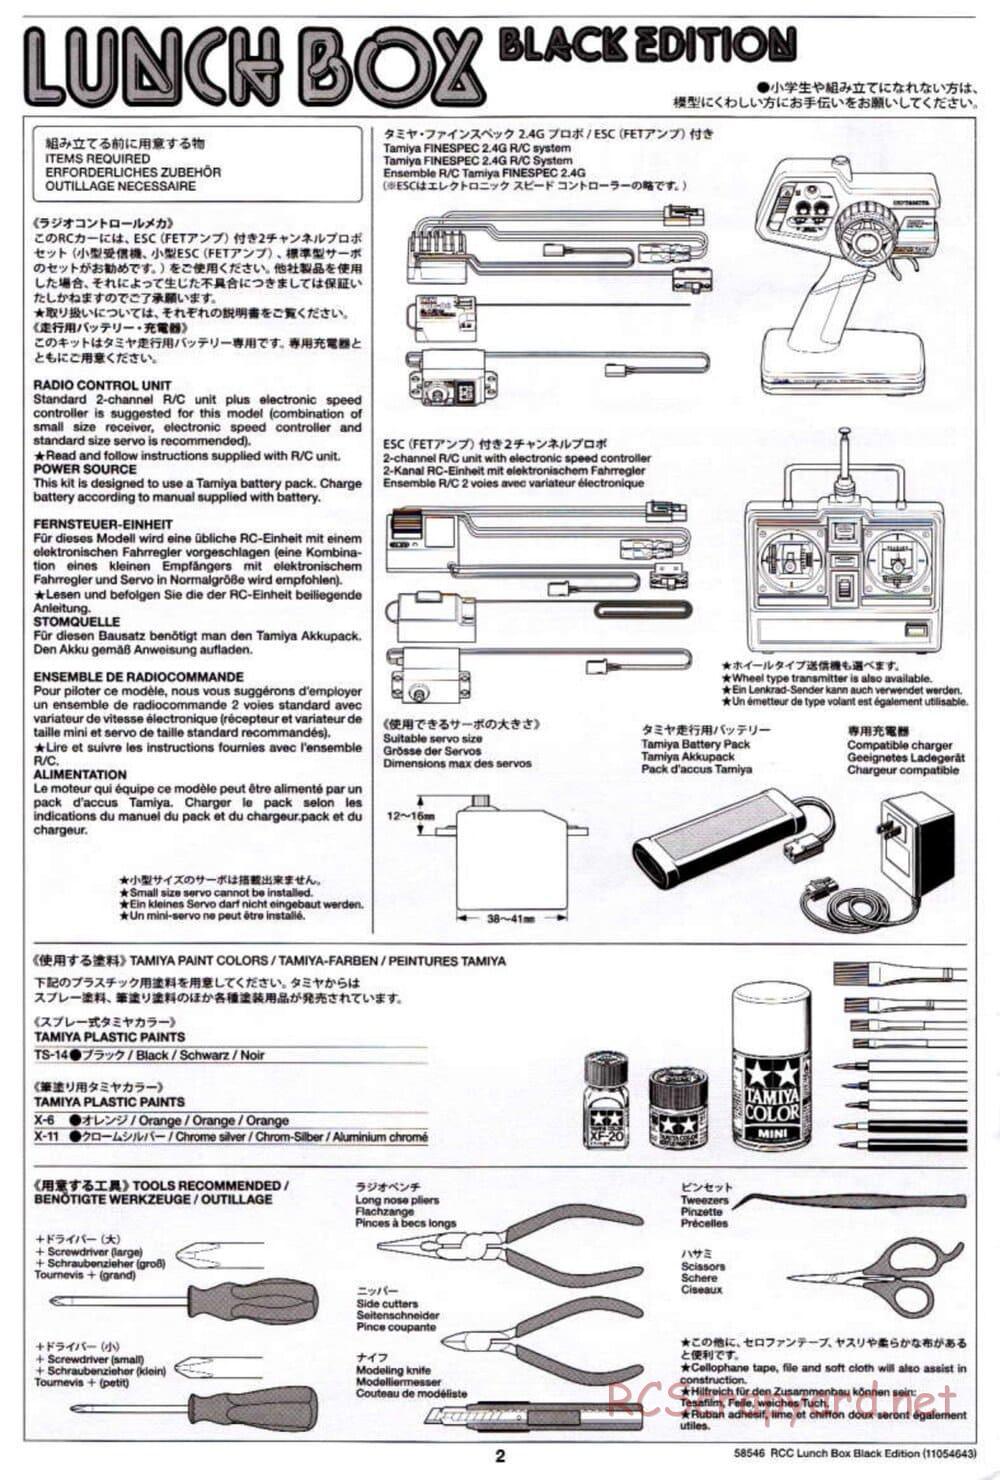 Tamiya - Lunch Box - Black Edition - CW-01 Chassis - Manual - Page 2